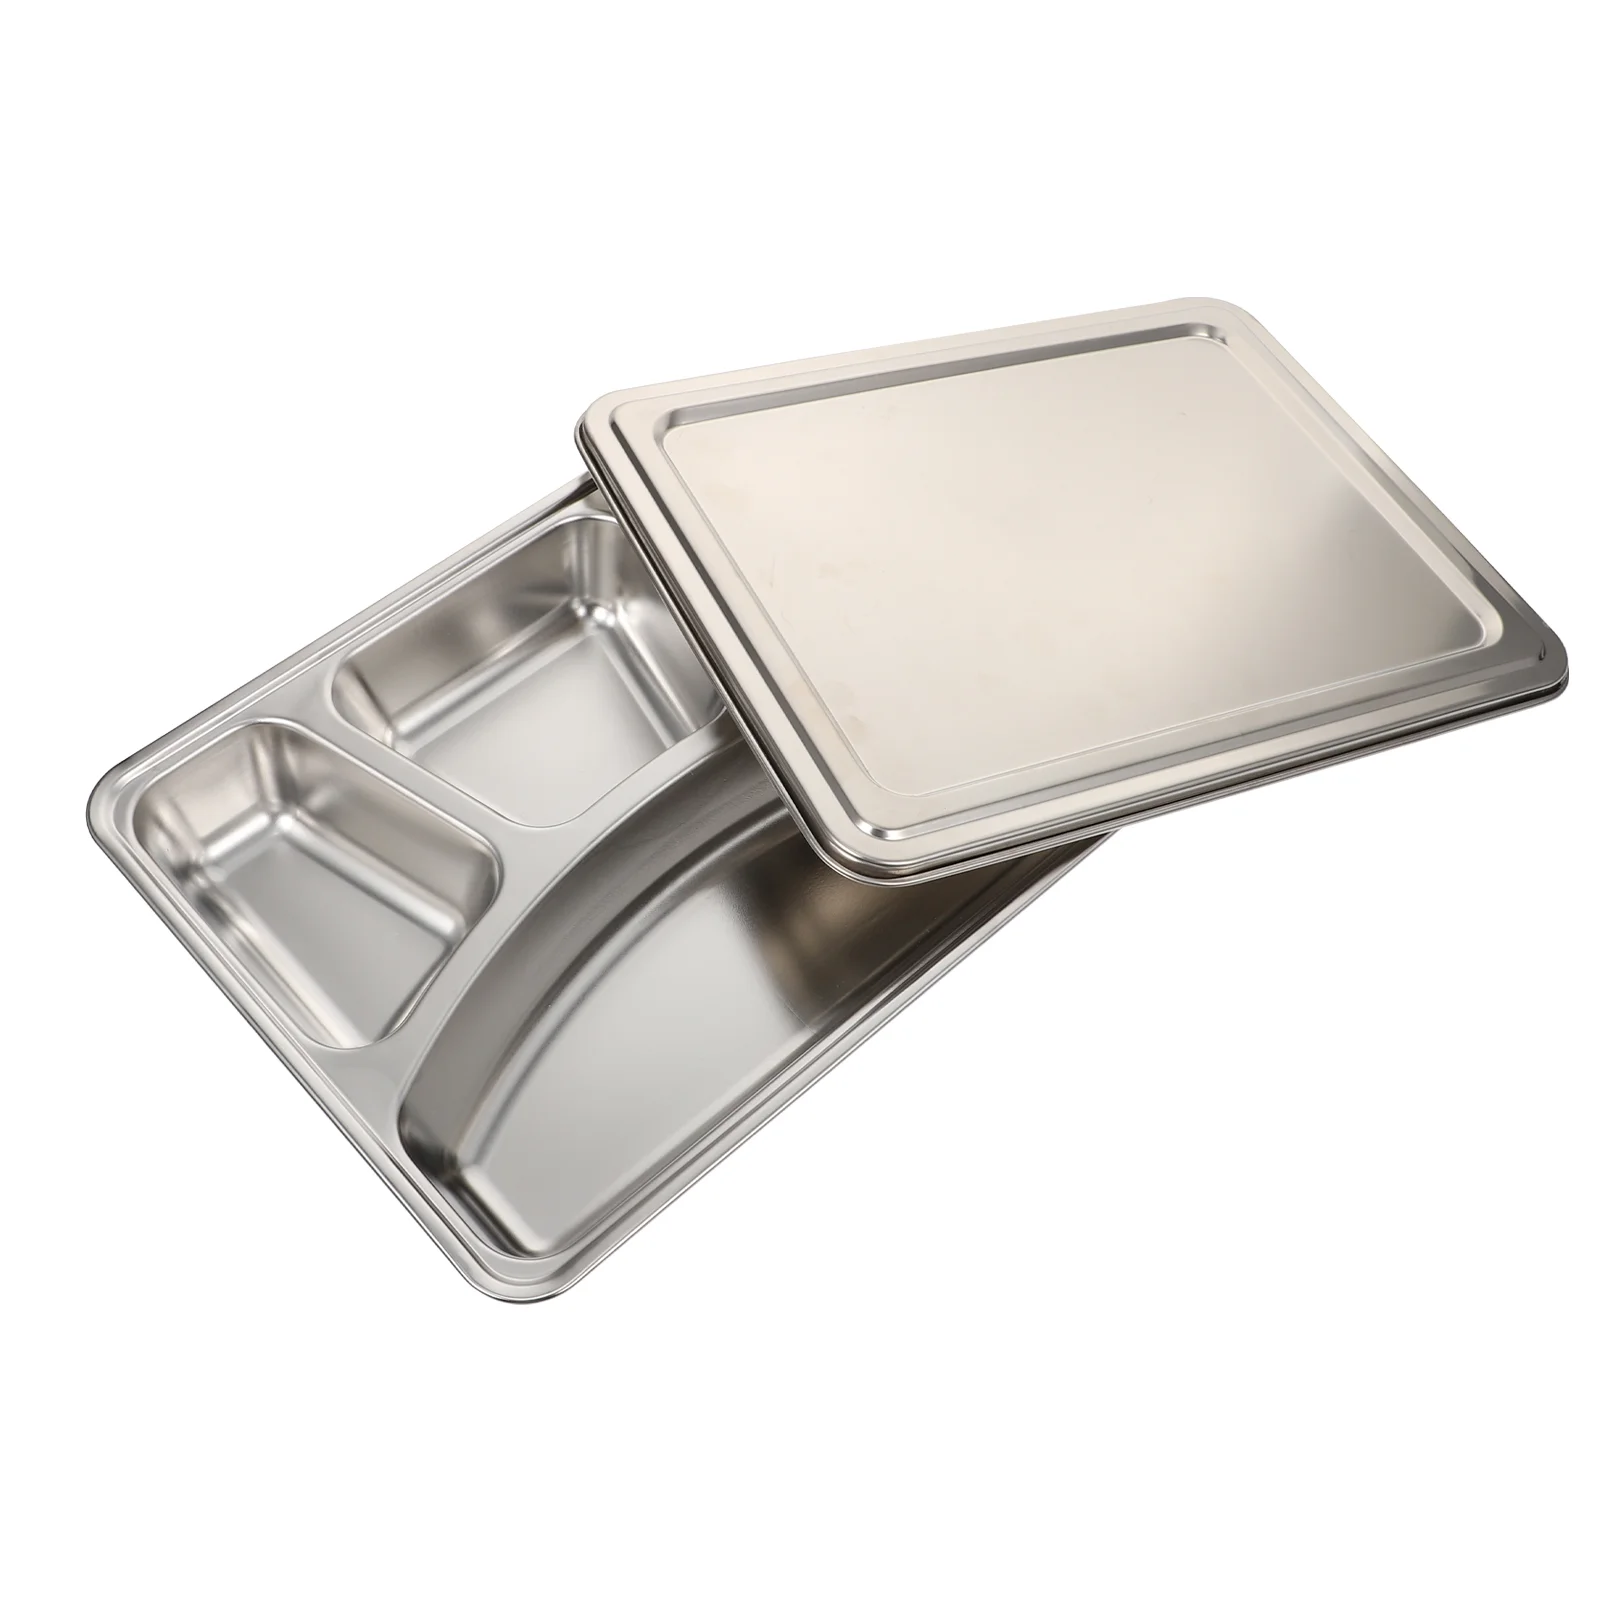 

Plate Plates Divided Tray Dinner Lunch Serving Trays Kids Container Steel Stainless Dish Cafeteria Healthy Compartment Box